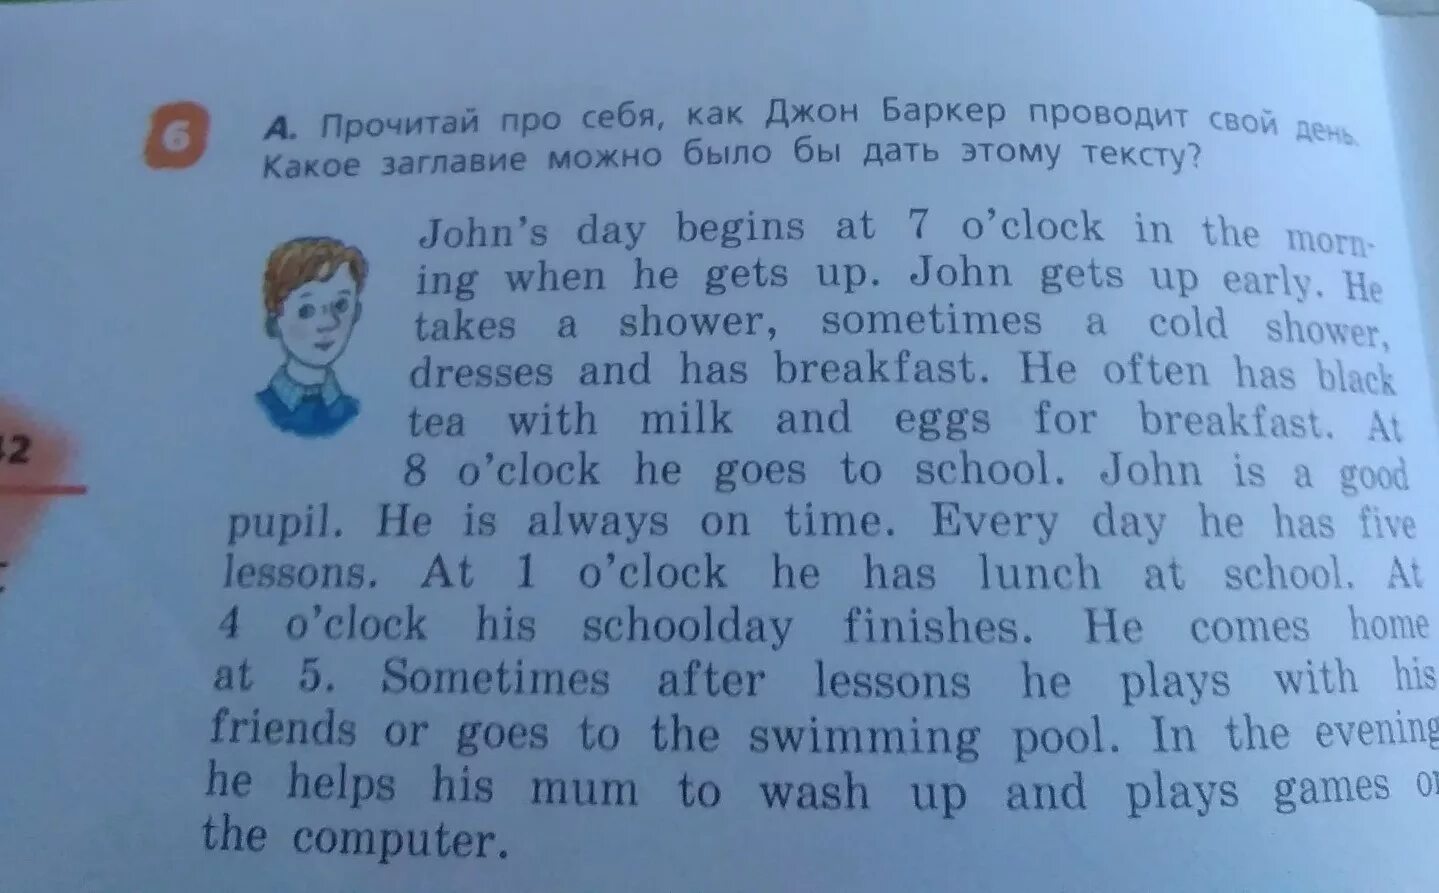 John fields is a Farmer he gets up at 5 o Clock ответы. Текст after School перевод. John goes to School перевод. John's Day begins at 7 o'Clock.